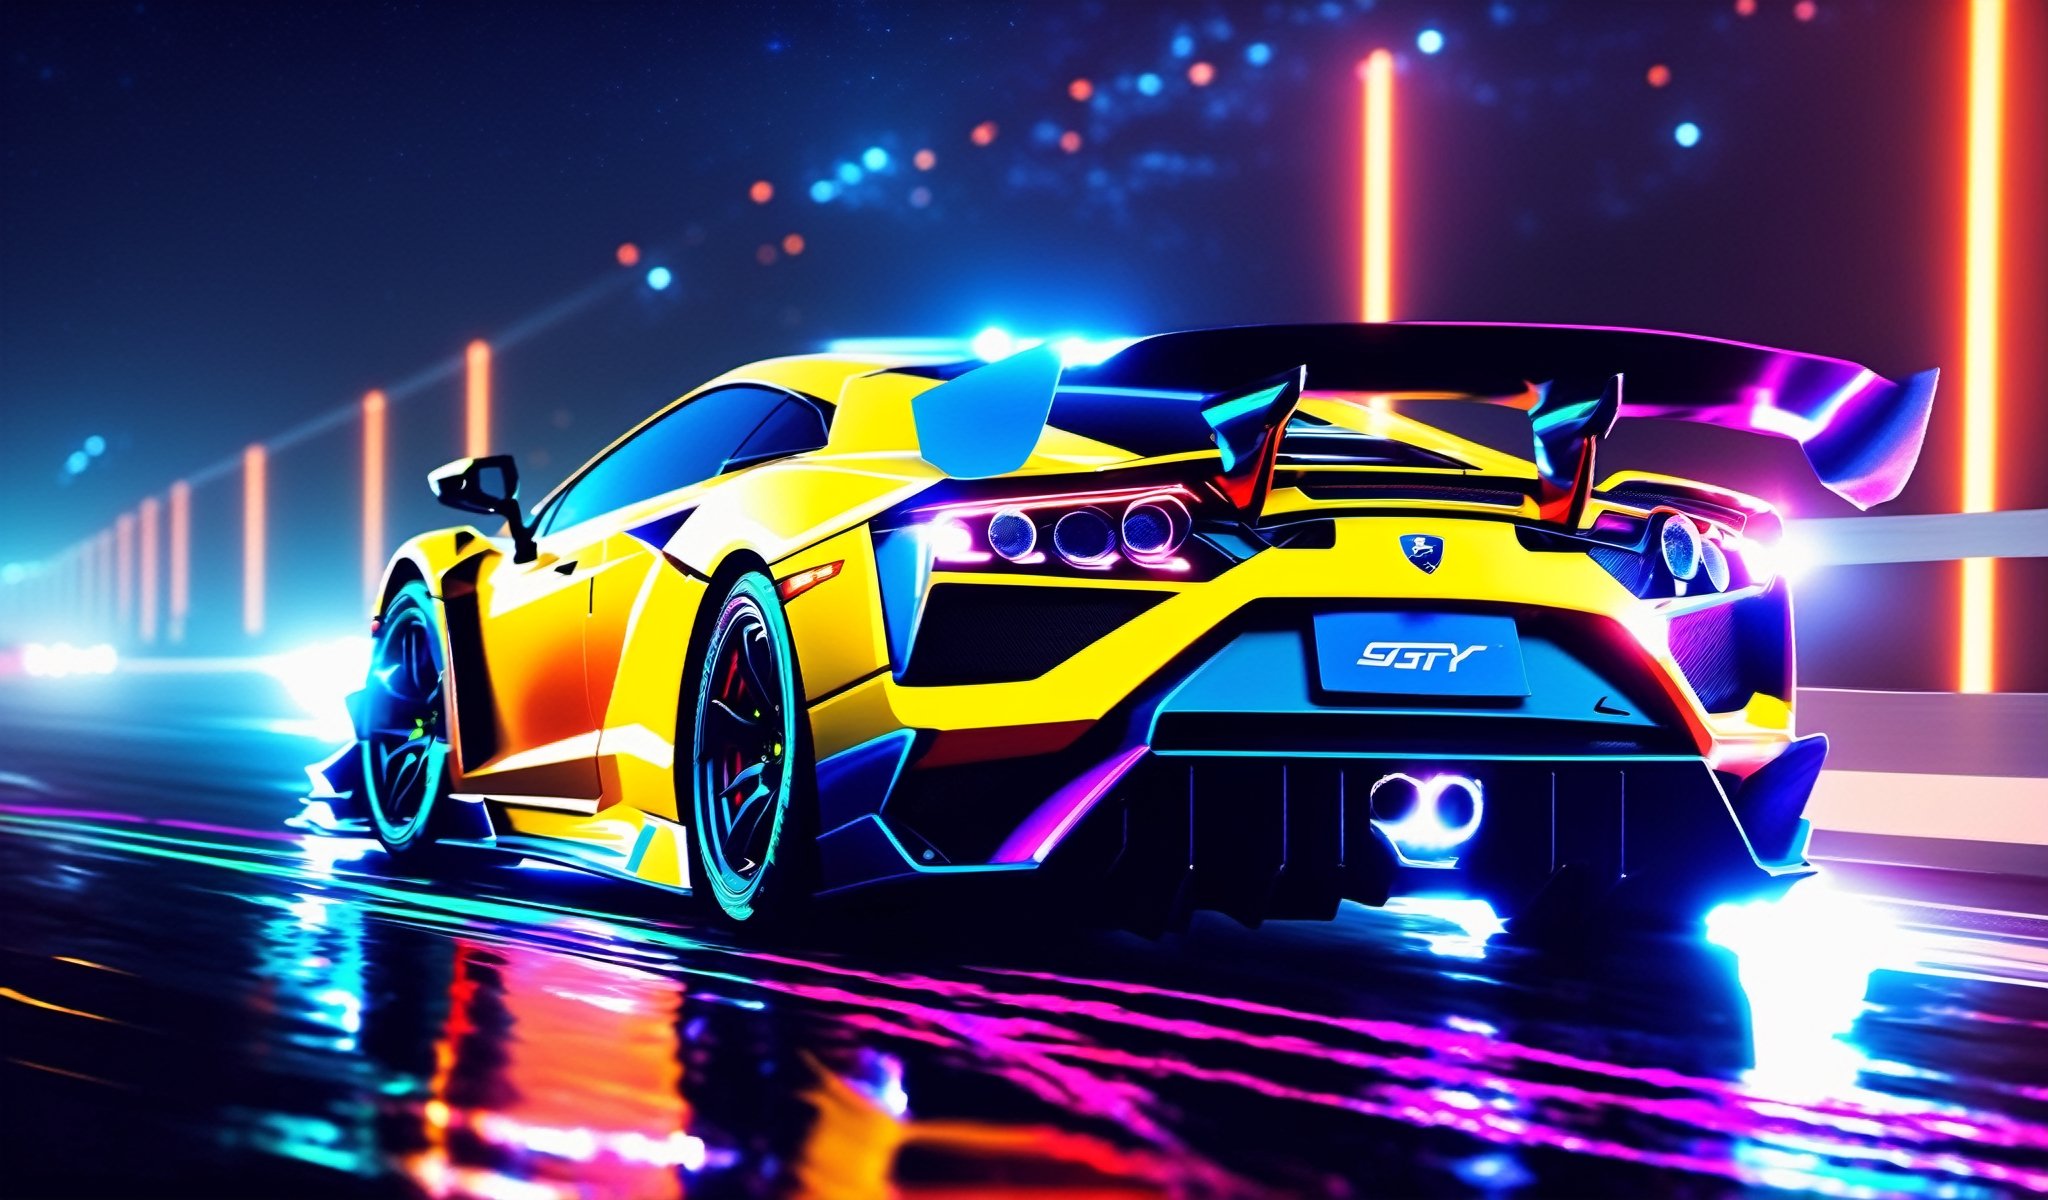 Legends on the Canvas,
On the canvas of asphalt, where dreams unfold,
GT-R  NSX, and  Lamborghini in a row, a story to be told.
Lambo, a painting of power and might,
NSX, strokes of elegance in the moonlight.
GT-R, bold colors of speed and grace, Anime-style street racer, neon-lit city, fast cars, drifting, adrenaline-fueled action, intense concentration, midnight speed, anime style, Realism, depth of field, sparkle, glowing light, reflection light, speed lines, first-person view, Ultra-Wide Angle, Sony FE, masterpiece, ccurate, anatomically correct, textured skin, super detail, best quality, award winning, highres, 4K, 8k, 16k
On the racetrack canvas, they find their place.,c_car,Car,Sports car,Nature,H effect,DonM3l3m3nt4lXL